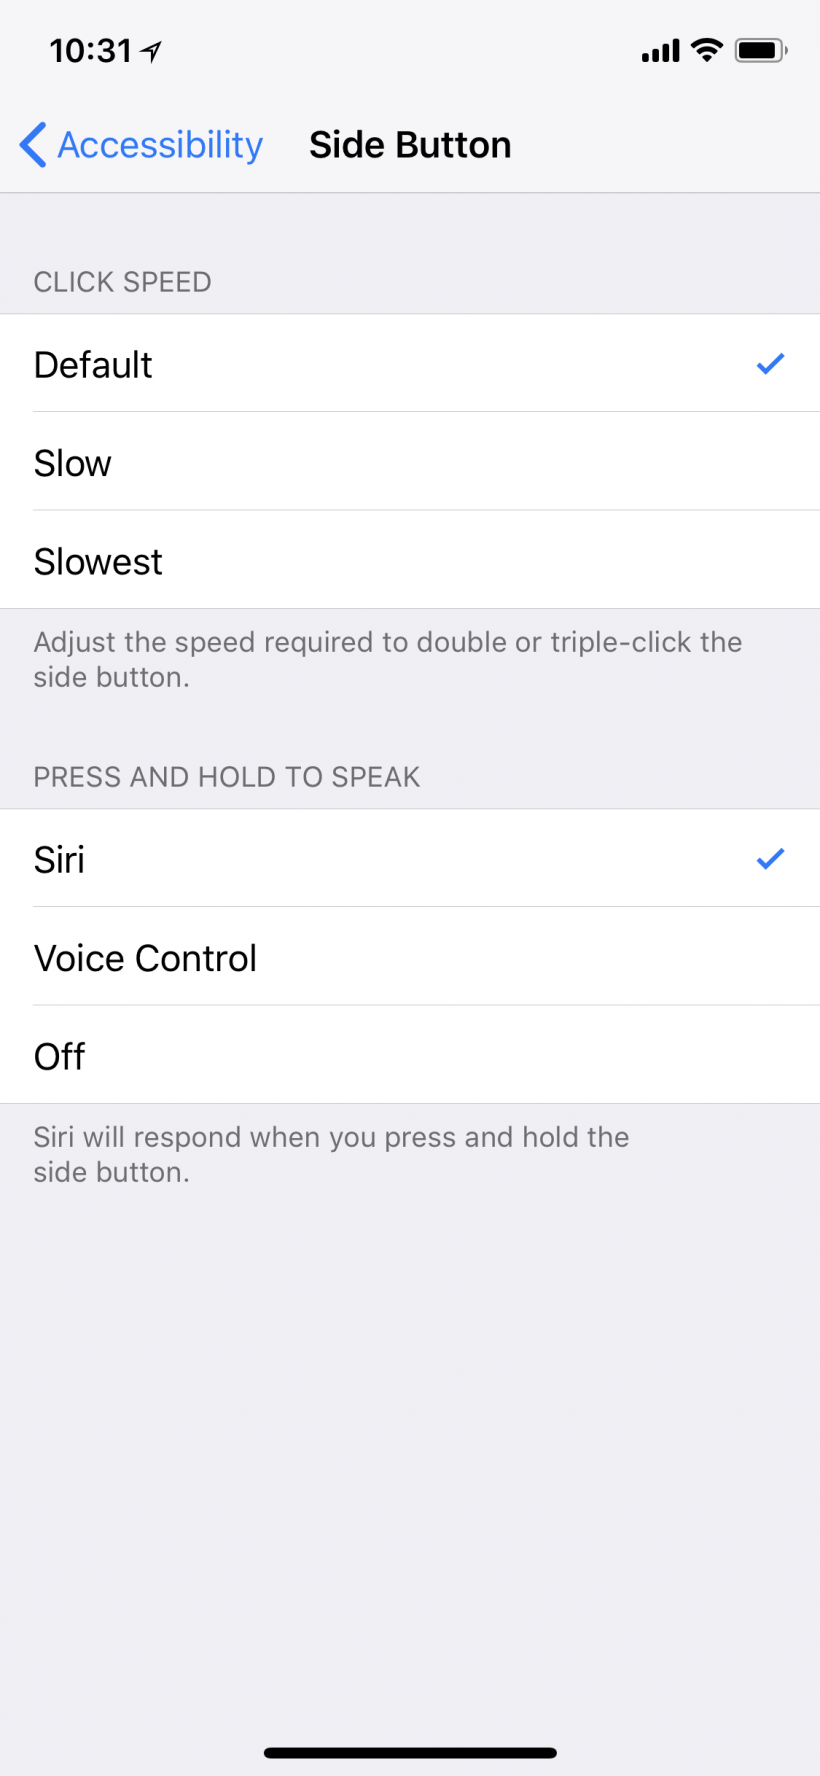 How to slow down the double click speed for the side button on iPhone X.